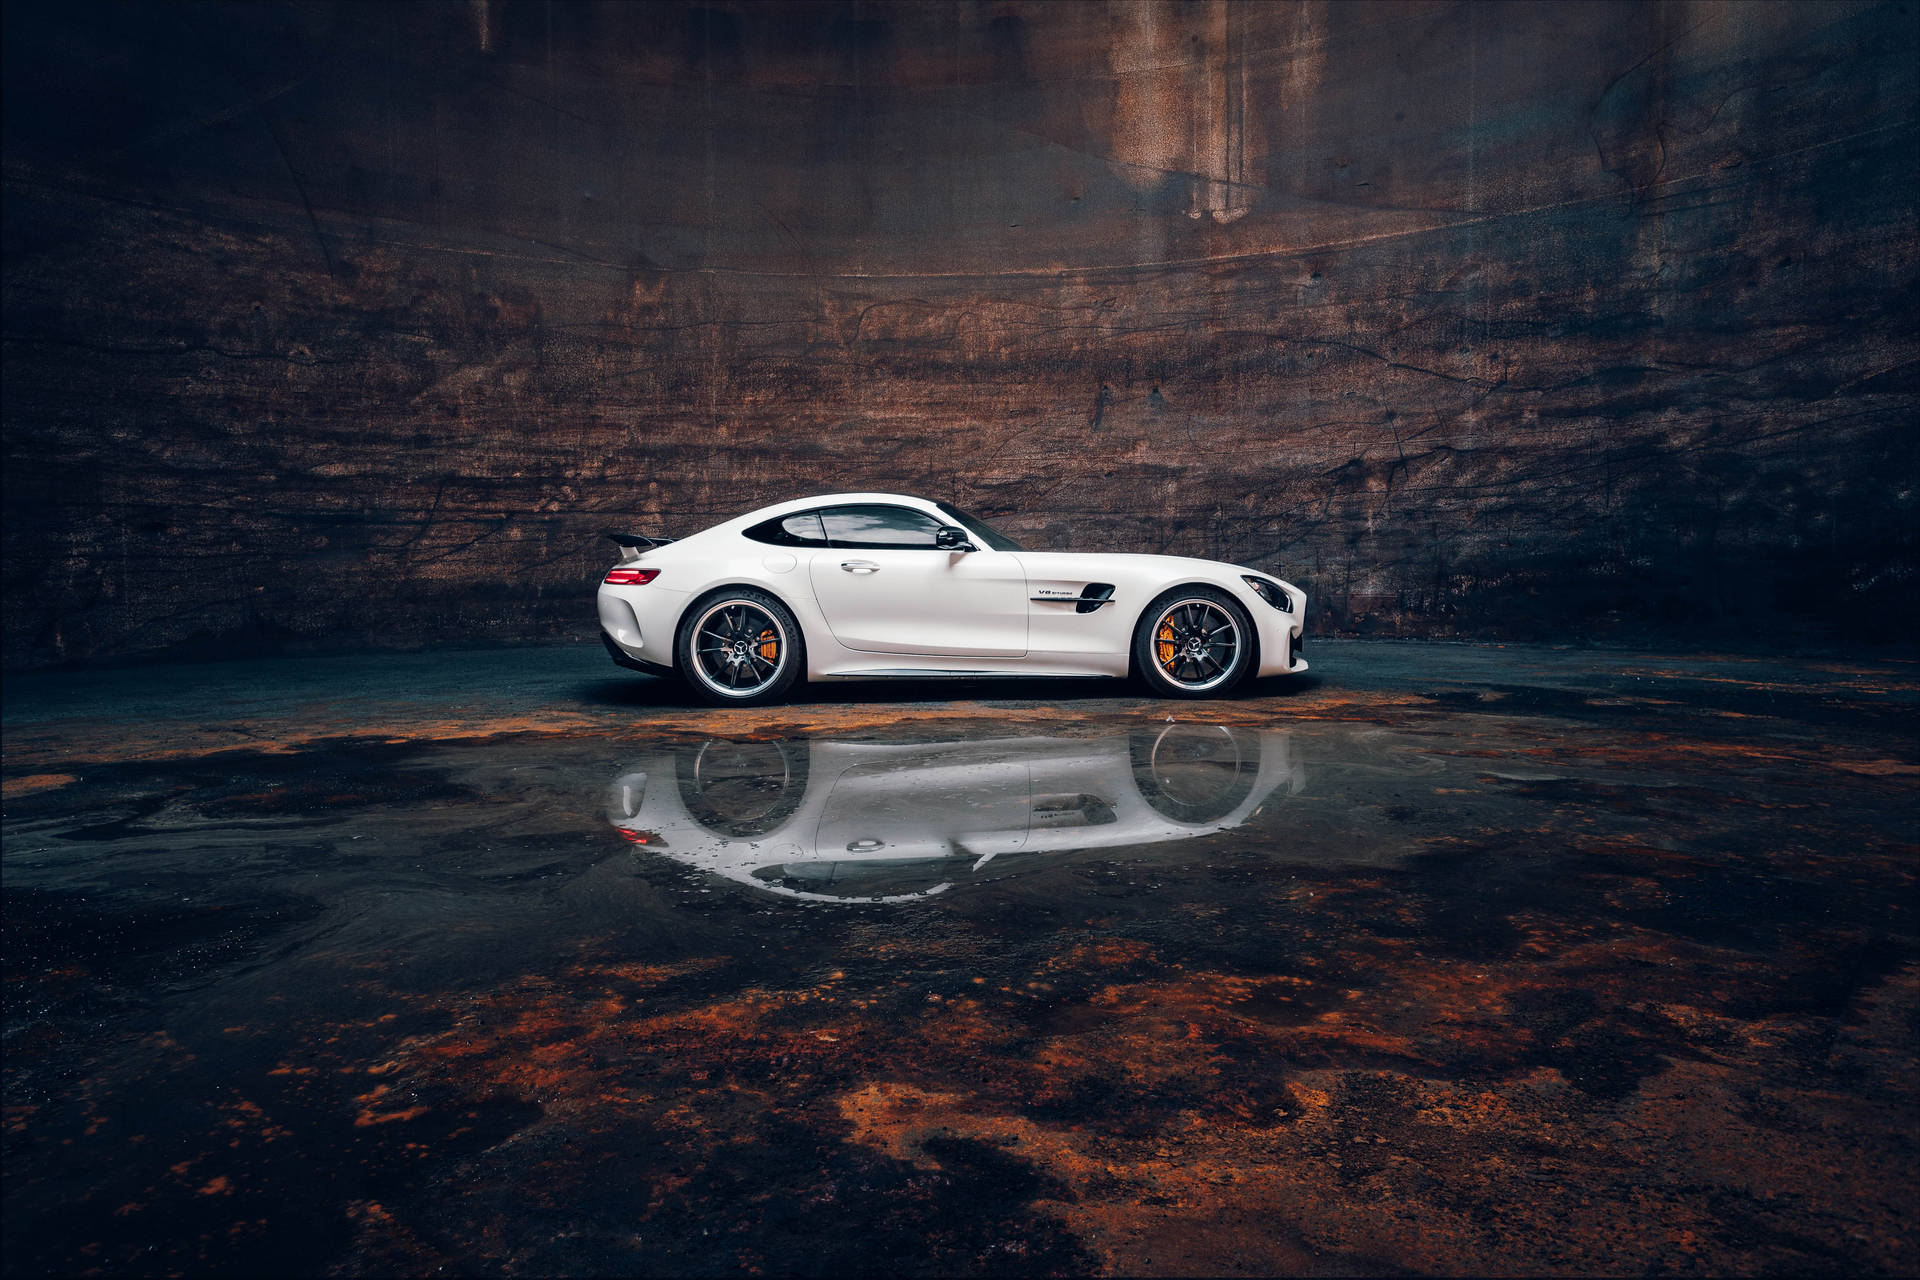 Caption: Mesmerizing Reflection Of Amg Gtr In A Puddle